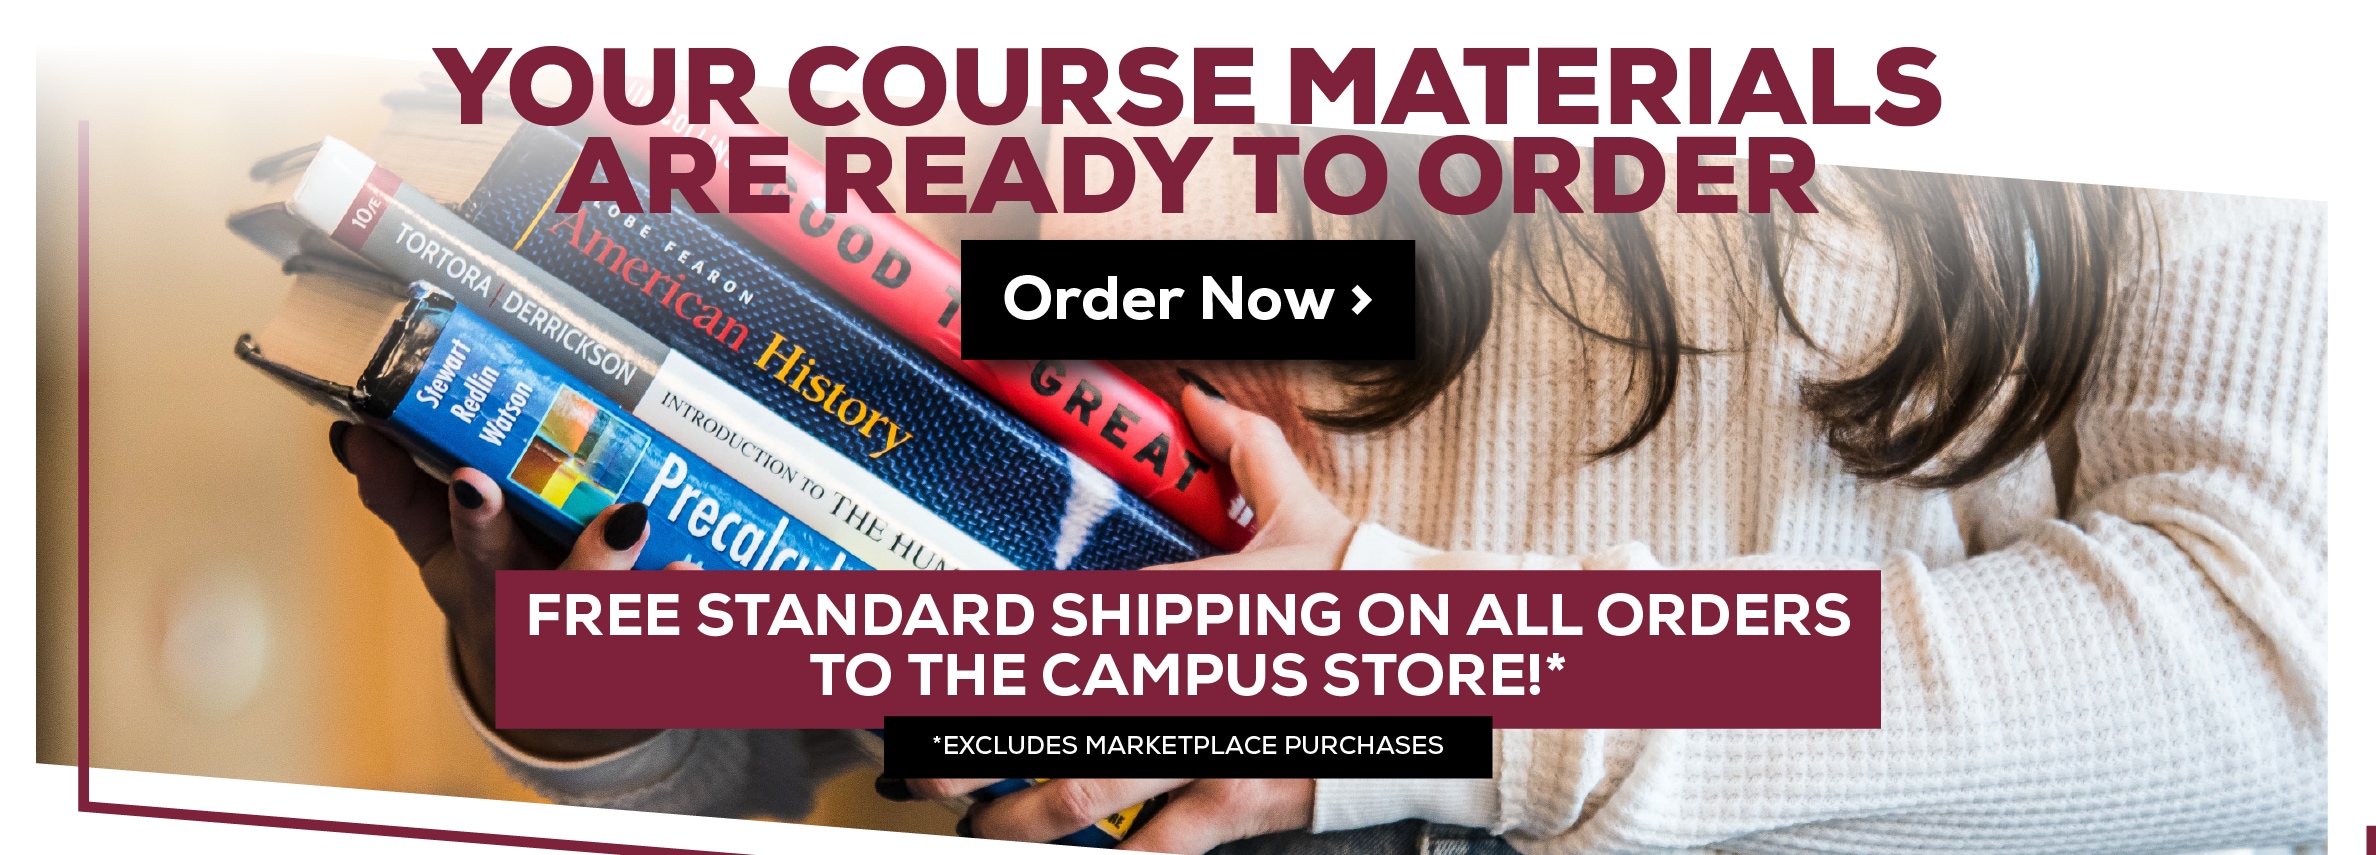 Your Course Materials are Ready to Order. Order Now. Free standard shipping on orders to campus! *Excludes marketplace purchases.